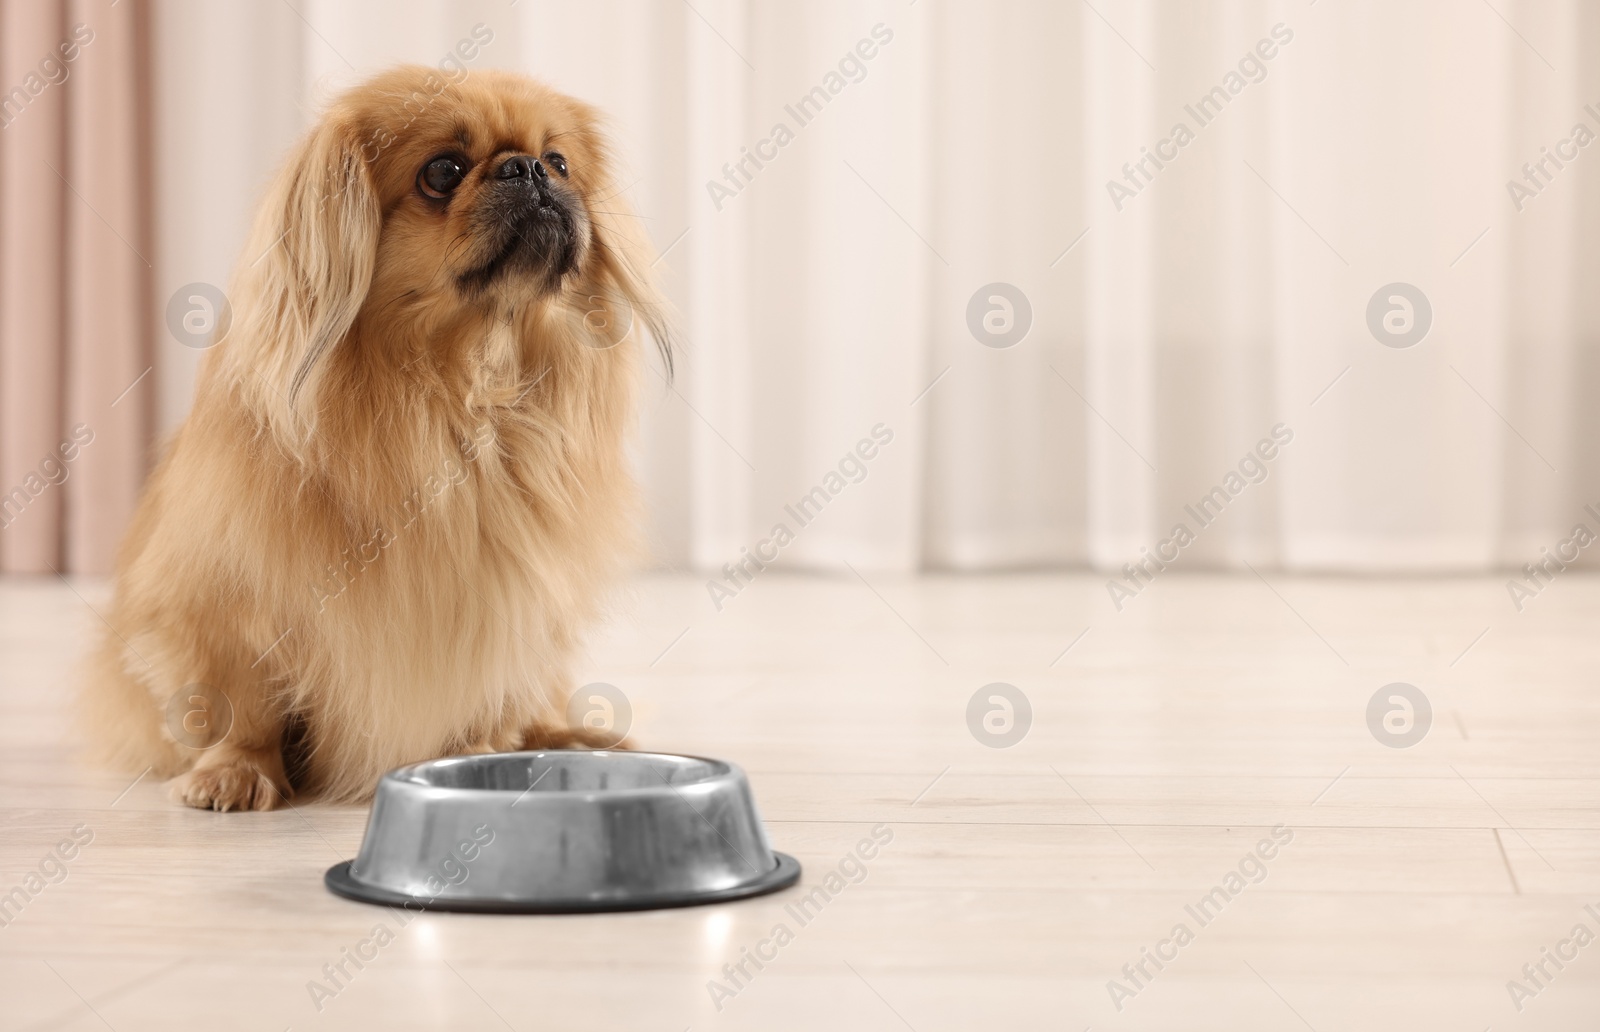 Photo of Cute Pekingese dog near pet bowl in room. Space for text